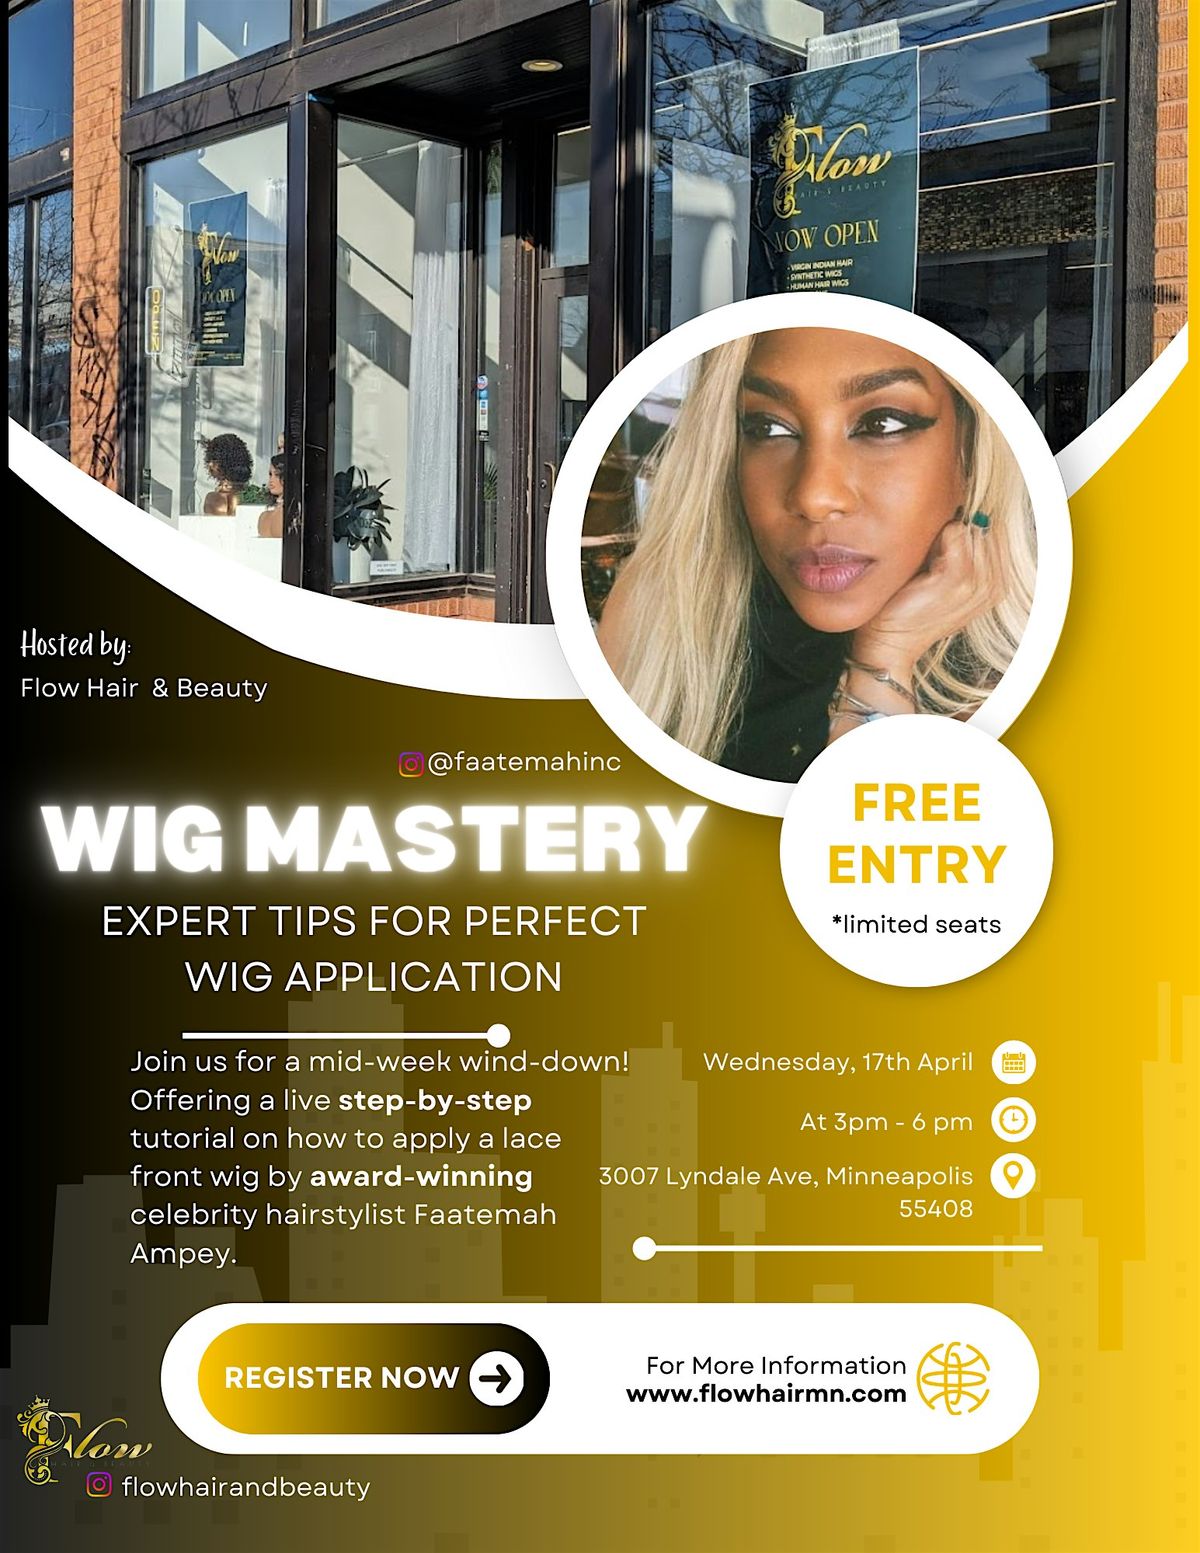 Wig Mastery: Learn how to apply lace front wigs, protective styling under wig cap